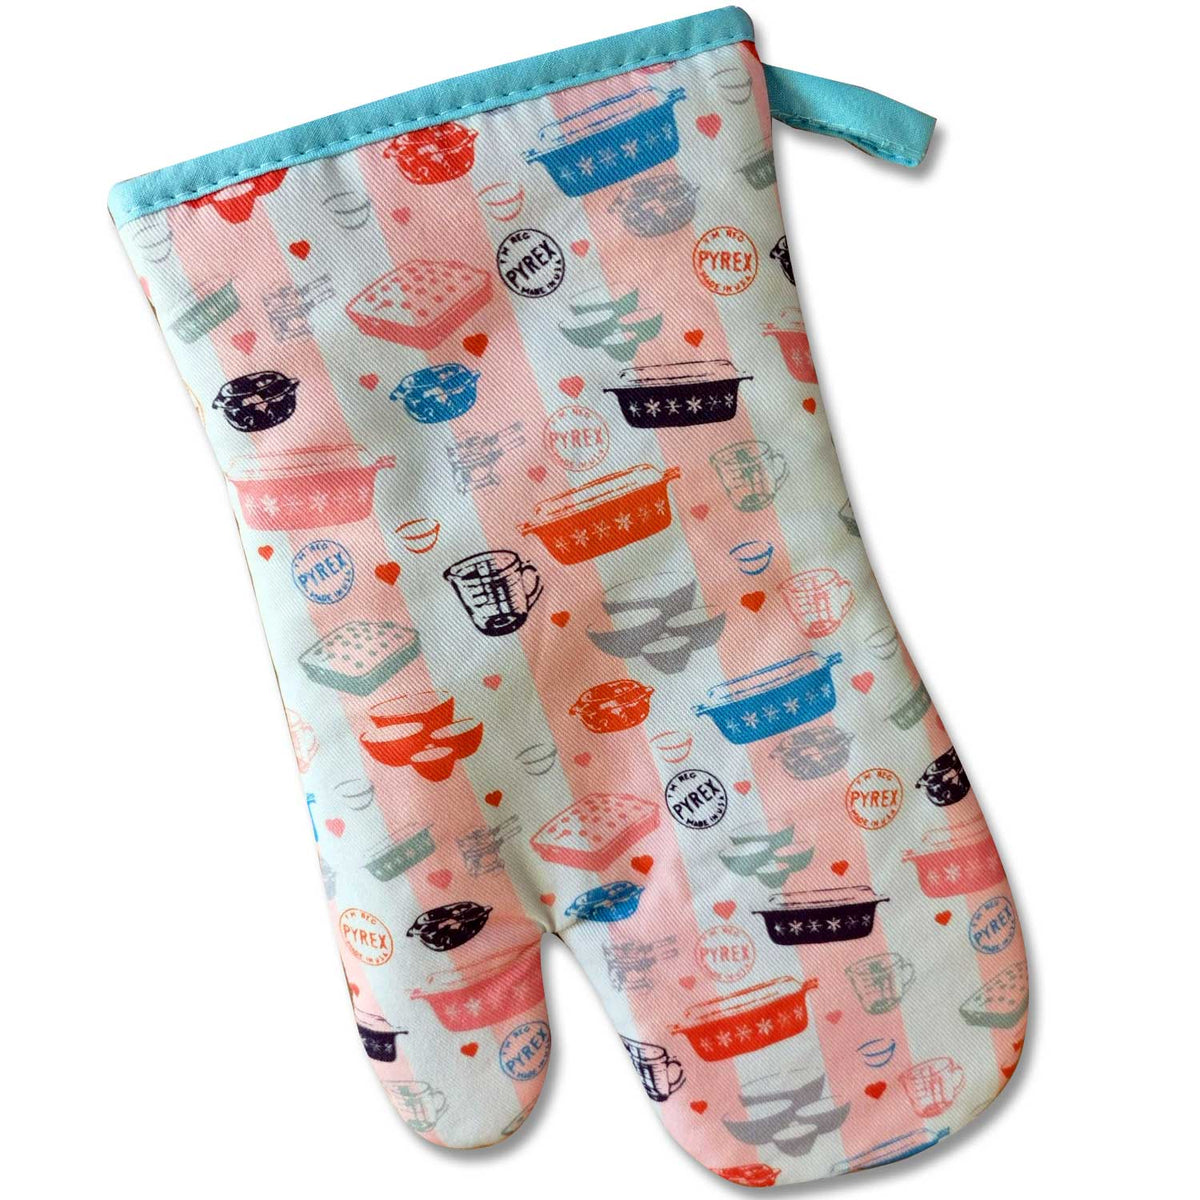 Kitchen Style Printed 'Cupcakes' Oven Mitt (Pink)